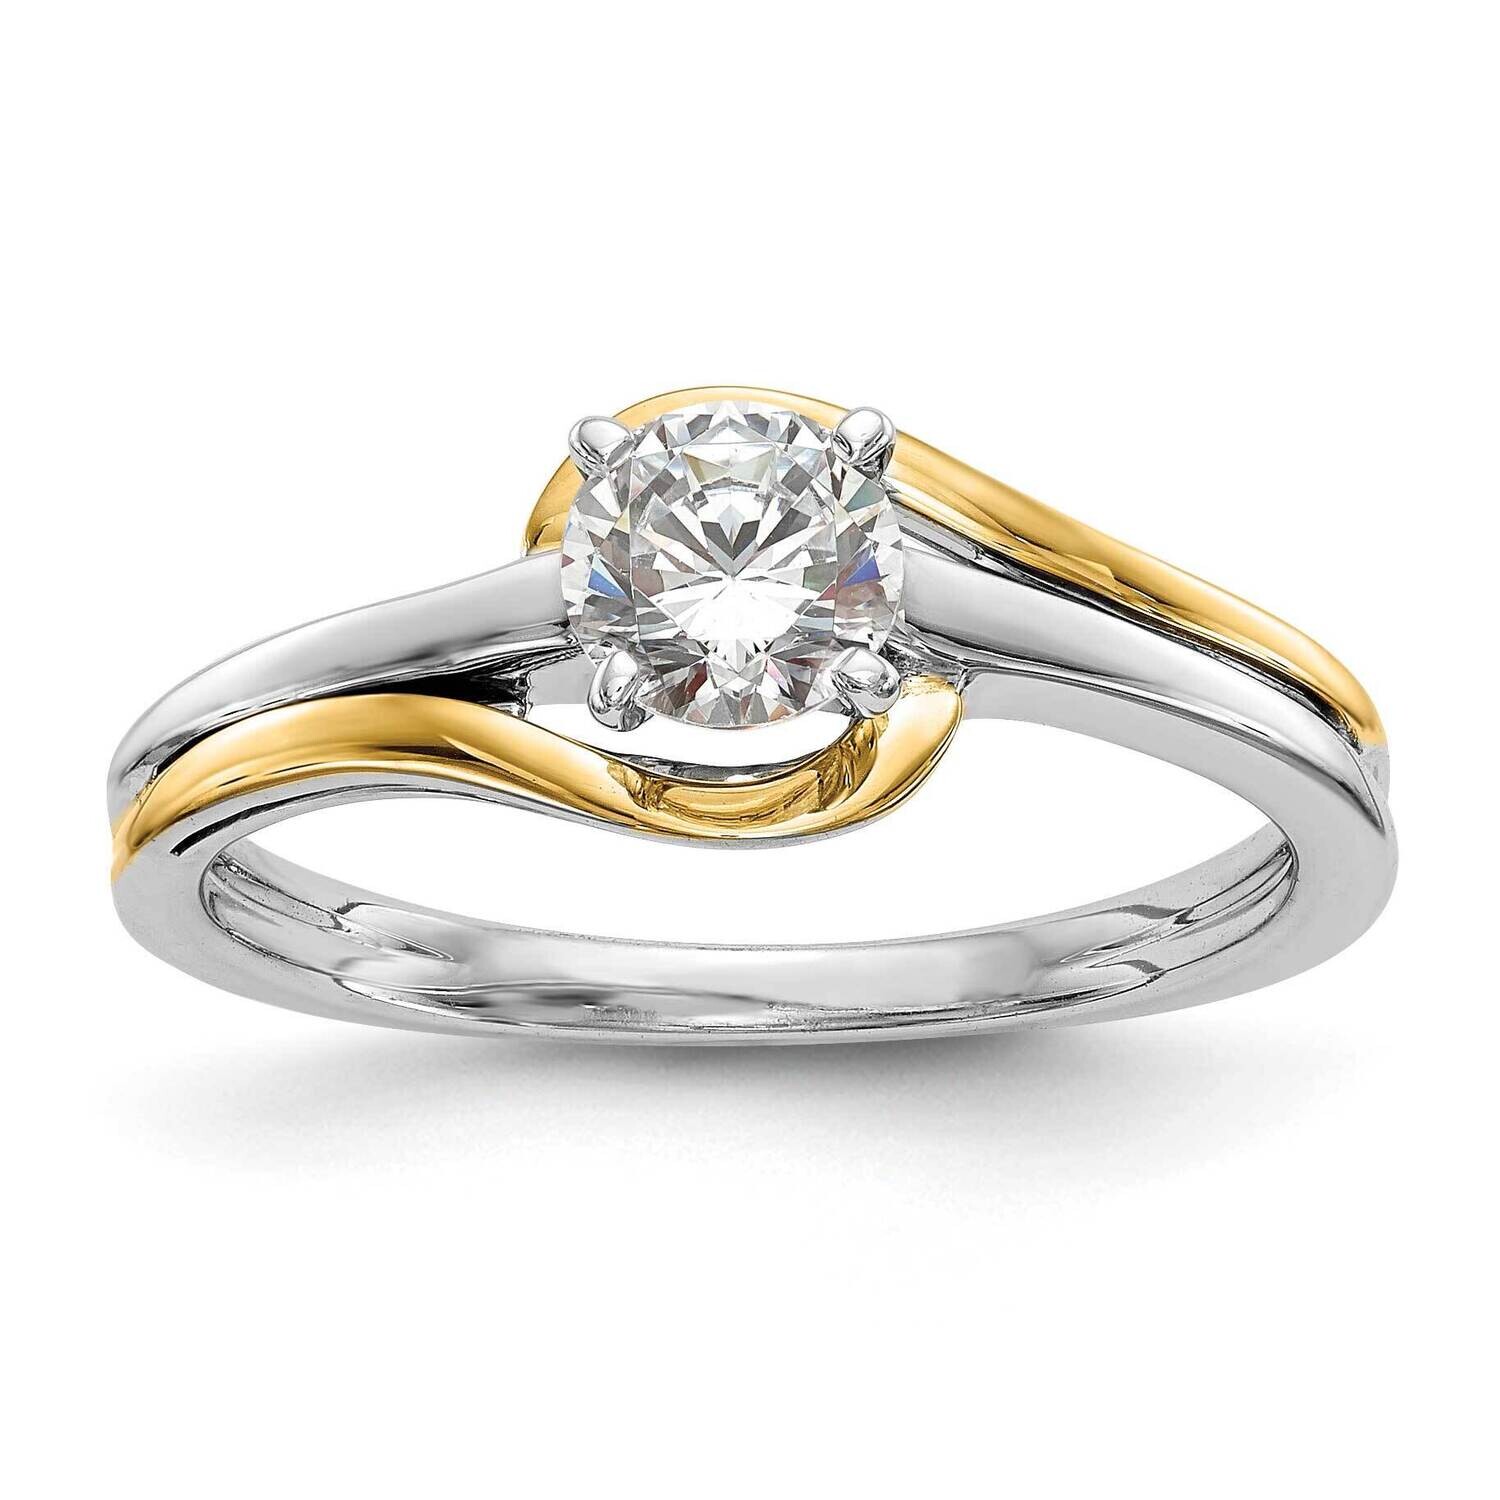 By-Pass Peg Set Engagement Ring Mounting 14k Two-Tone Gold RM2468E-CYWAA